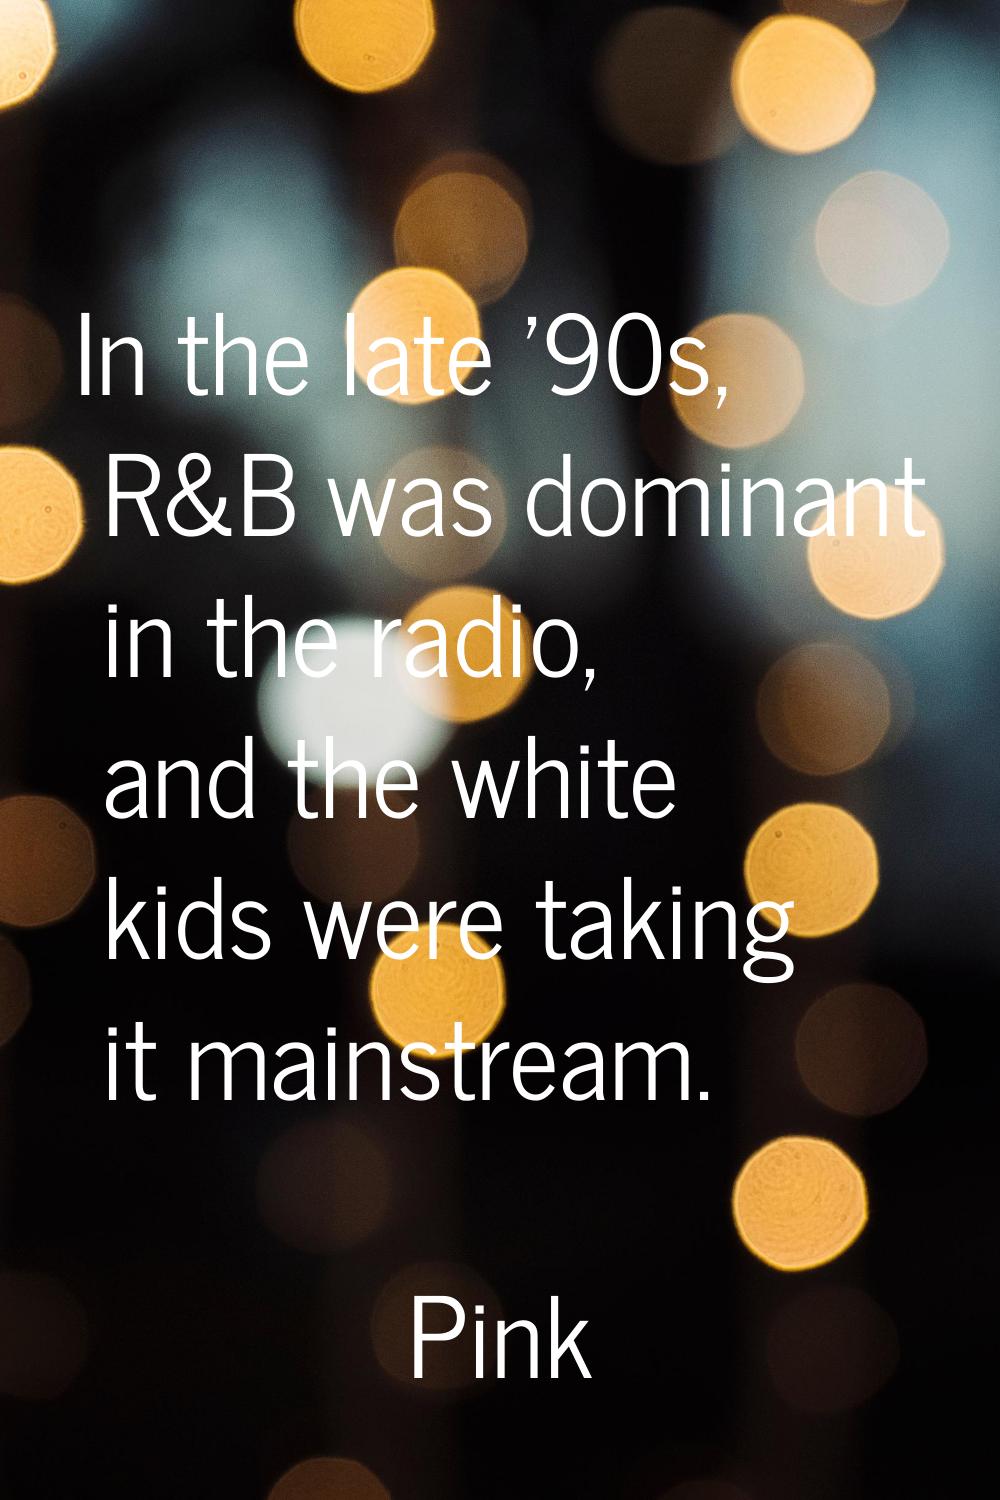 In the late '90s, R&B was dominant in the radio, and the white kids were taking it mainstream.